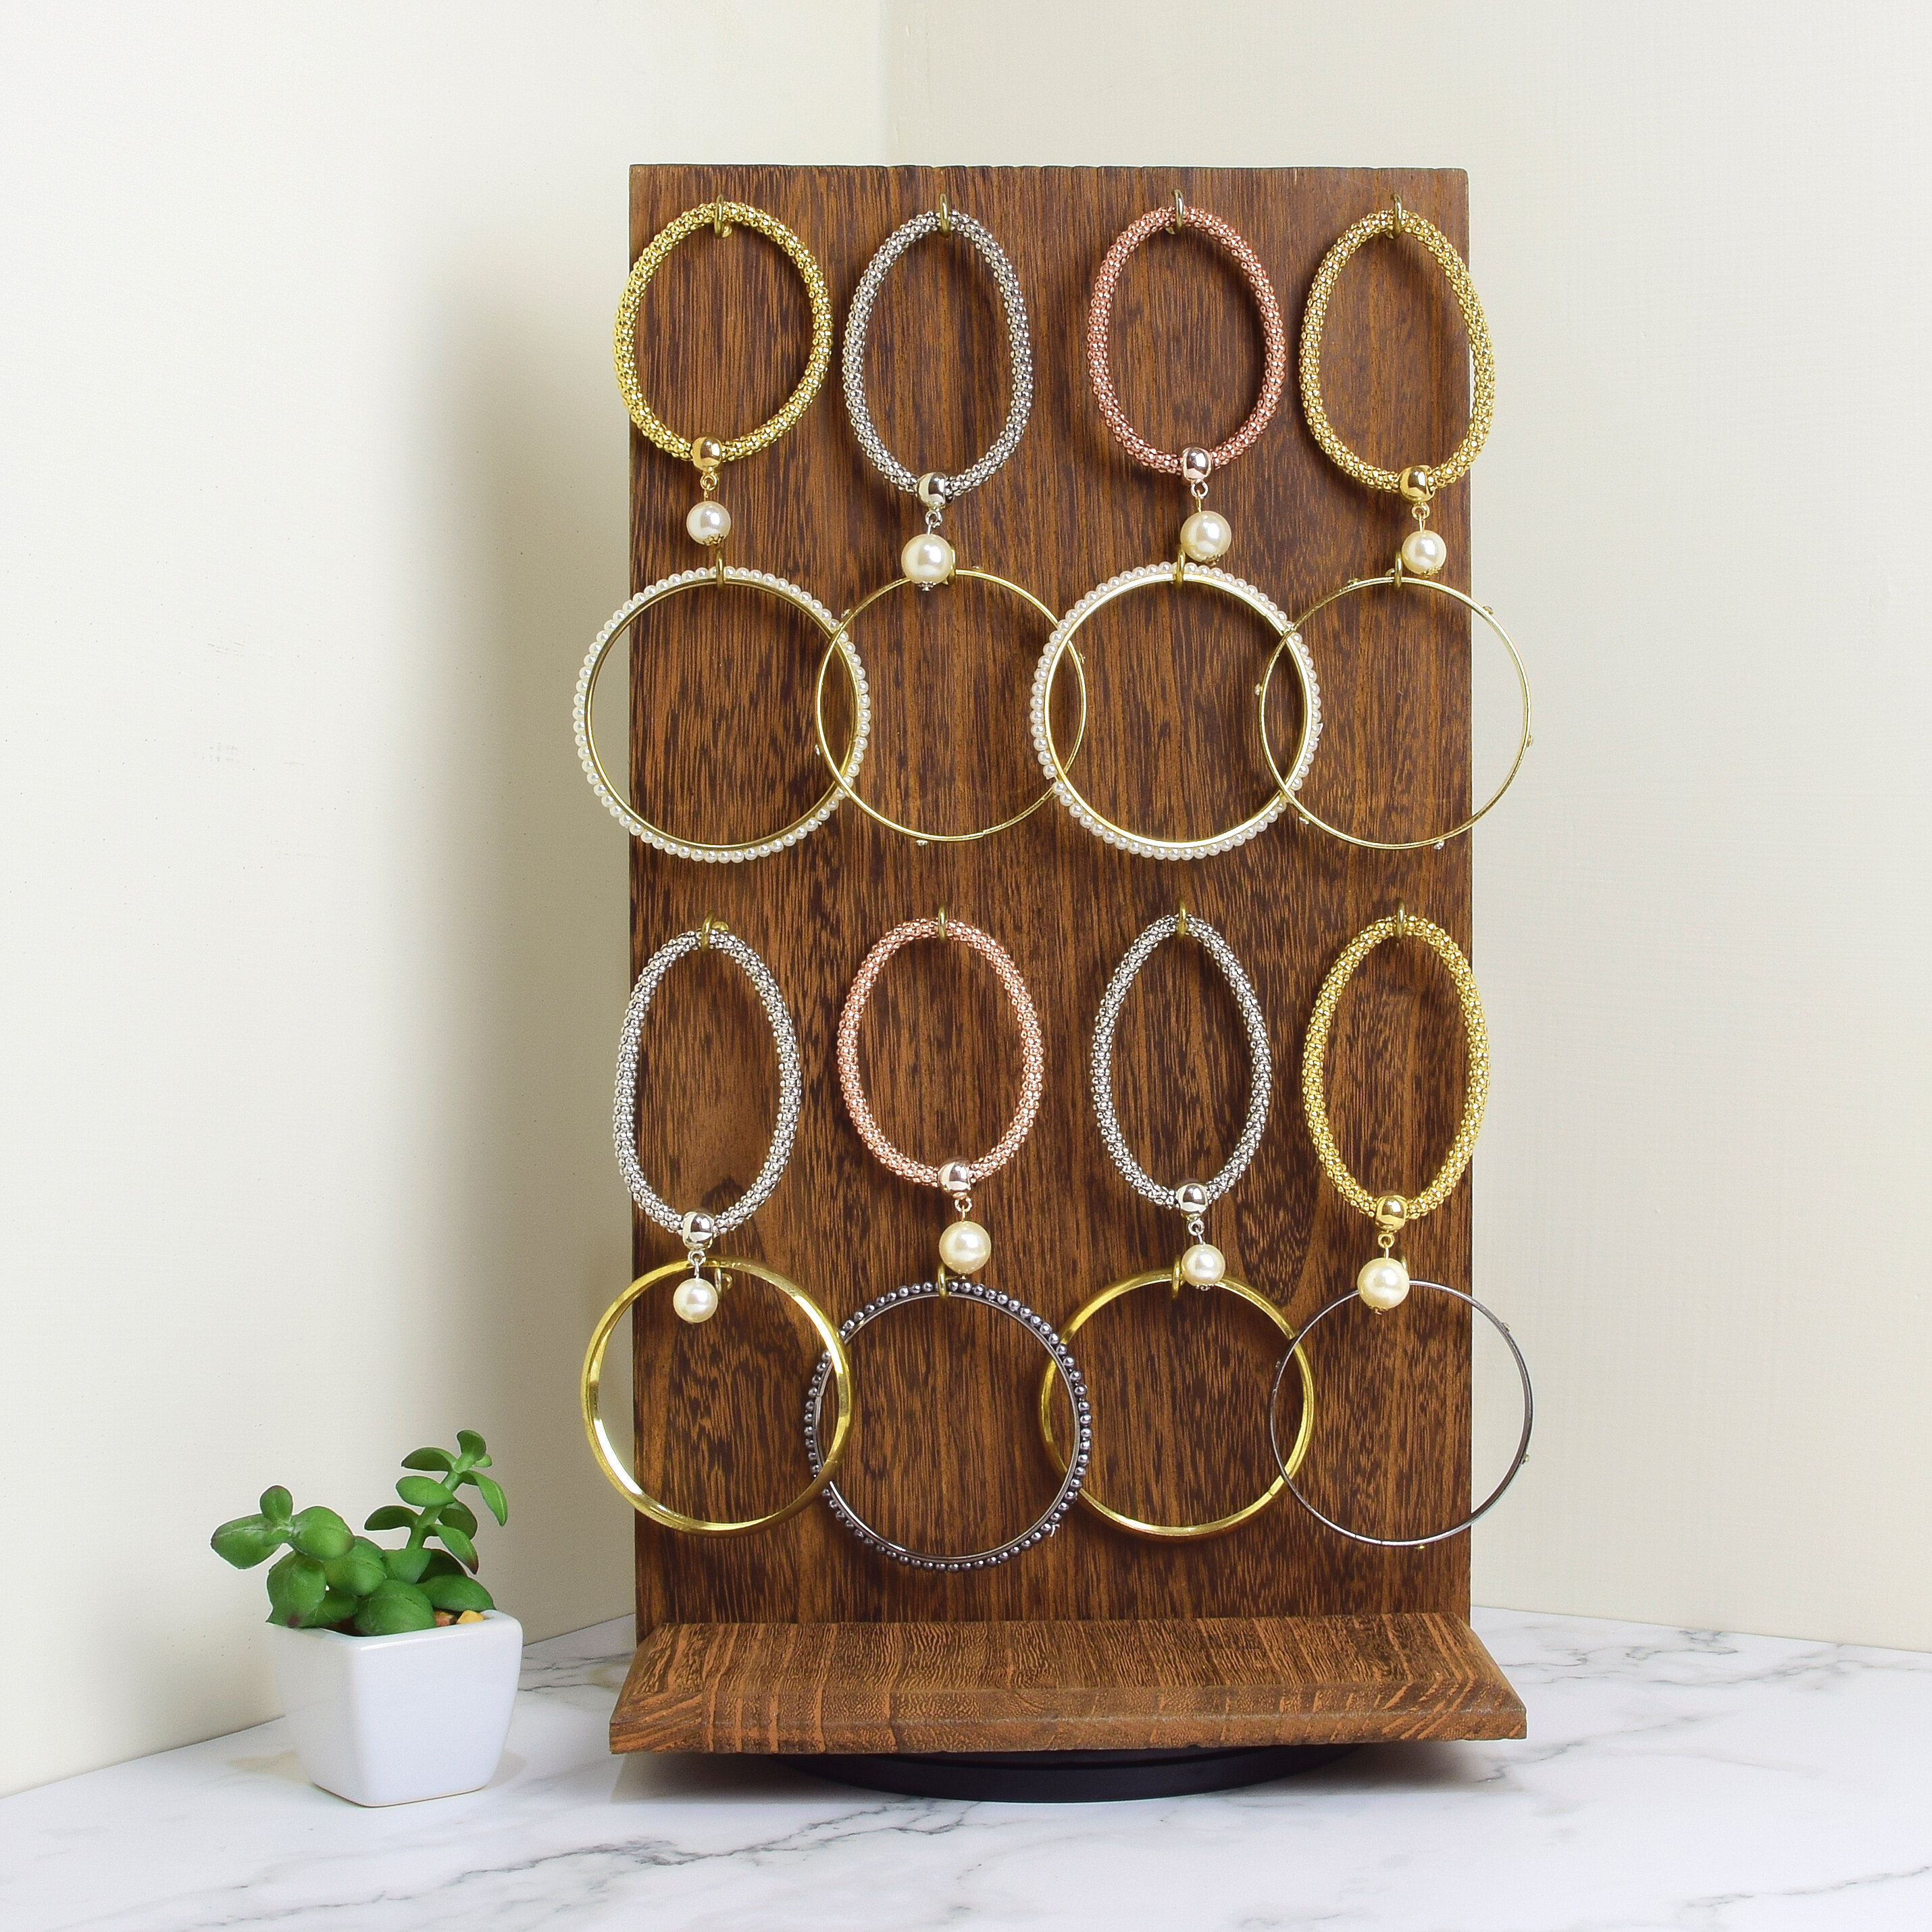 Fixturedisplays Wooden Rotating Two-Sided Jewelry Display Stand, Rotating Organizer with 32 Hooks for Store, Merchants at Shows, Earring Display with